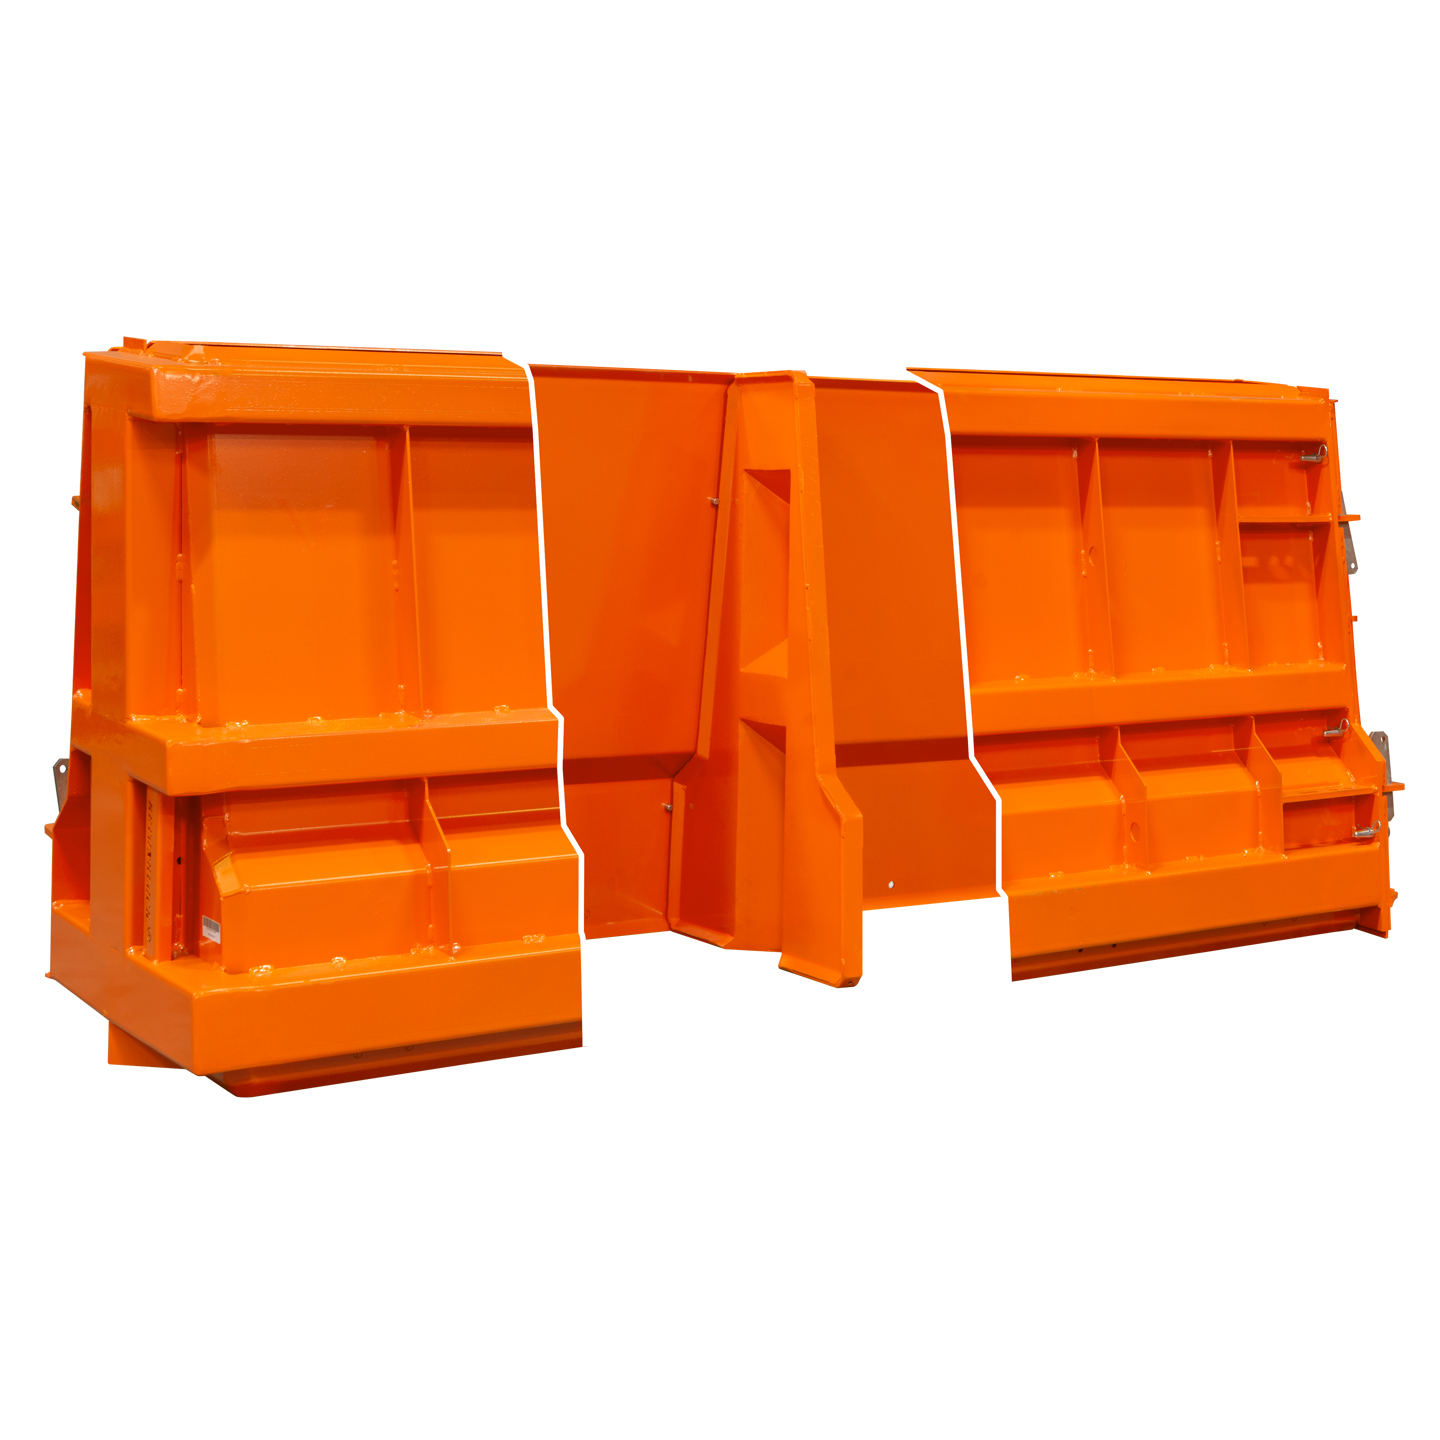 Orange concrete barrier mold 200x54x90 with partition wall from Betonblock